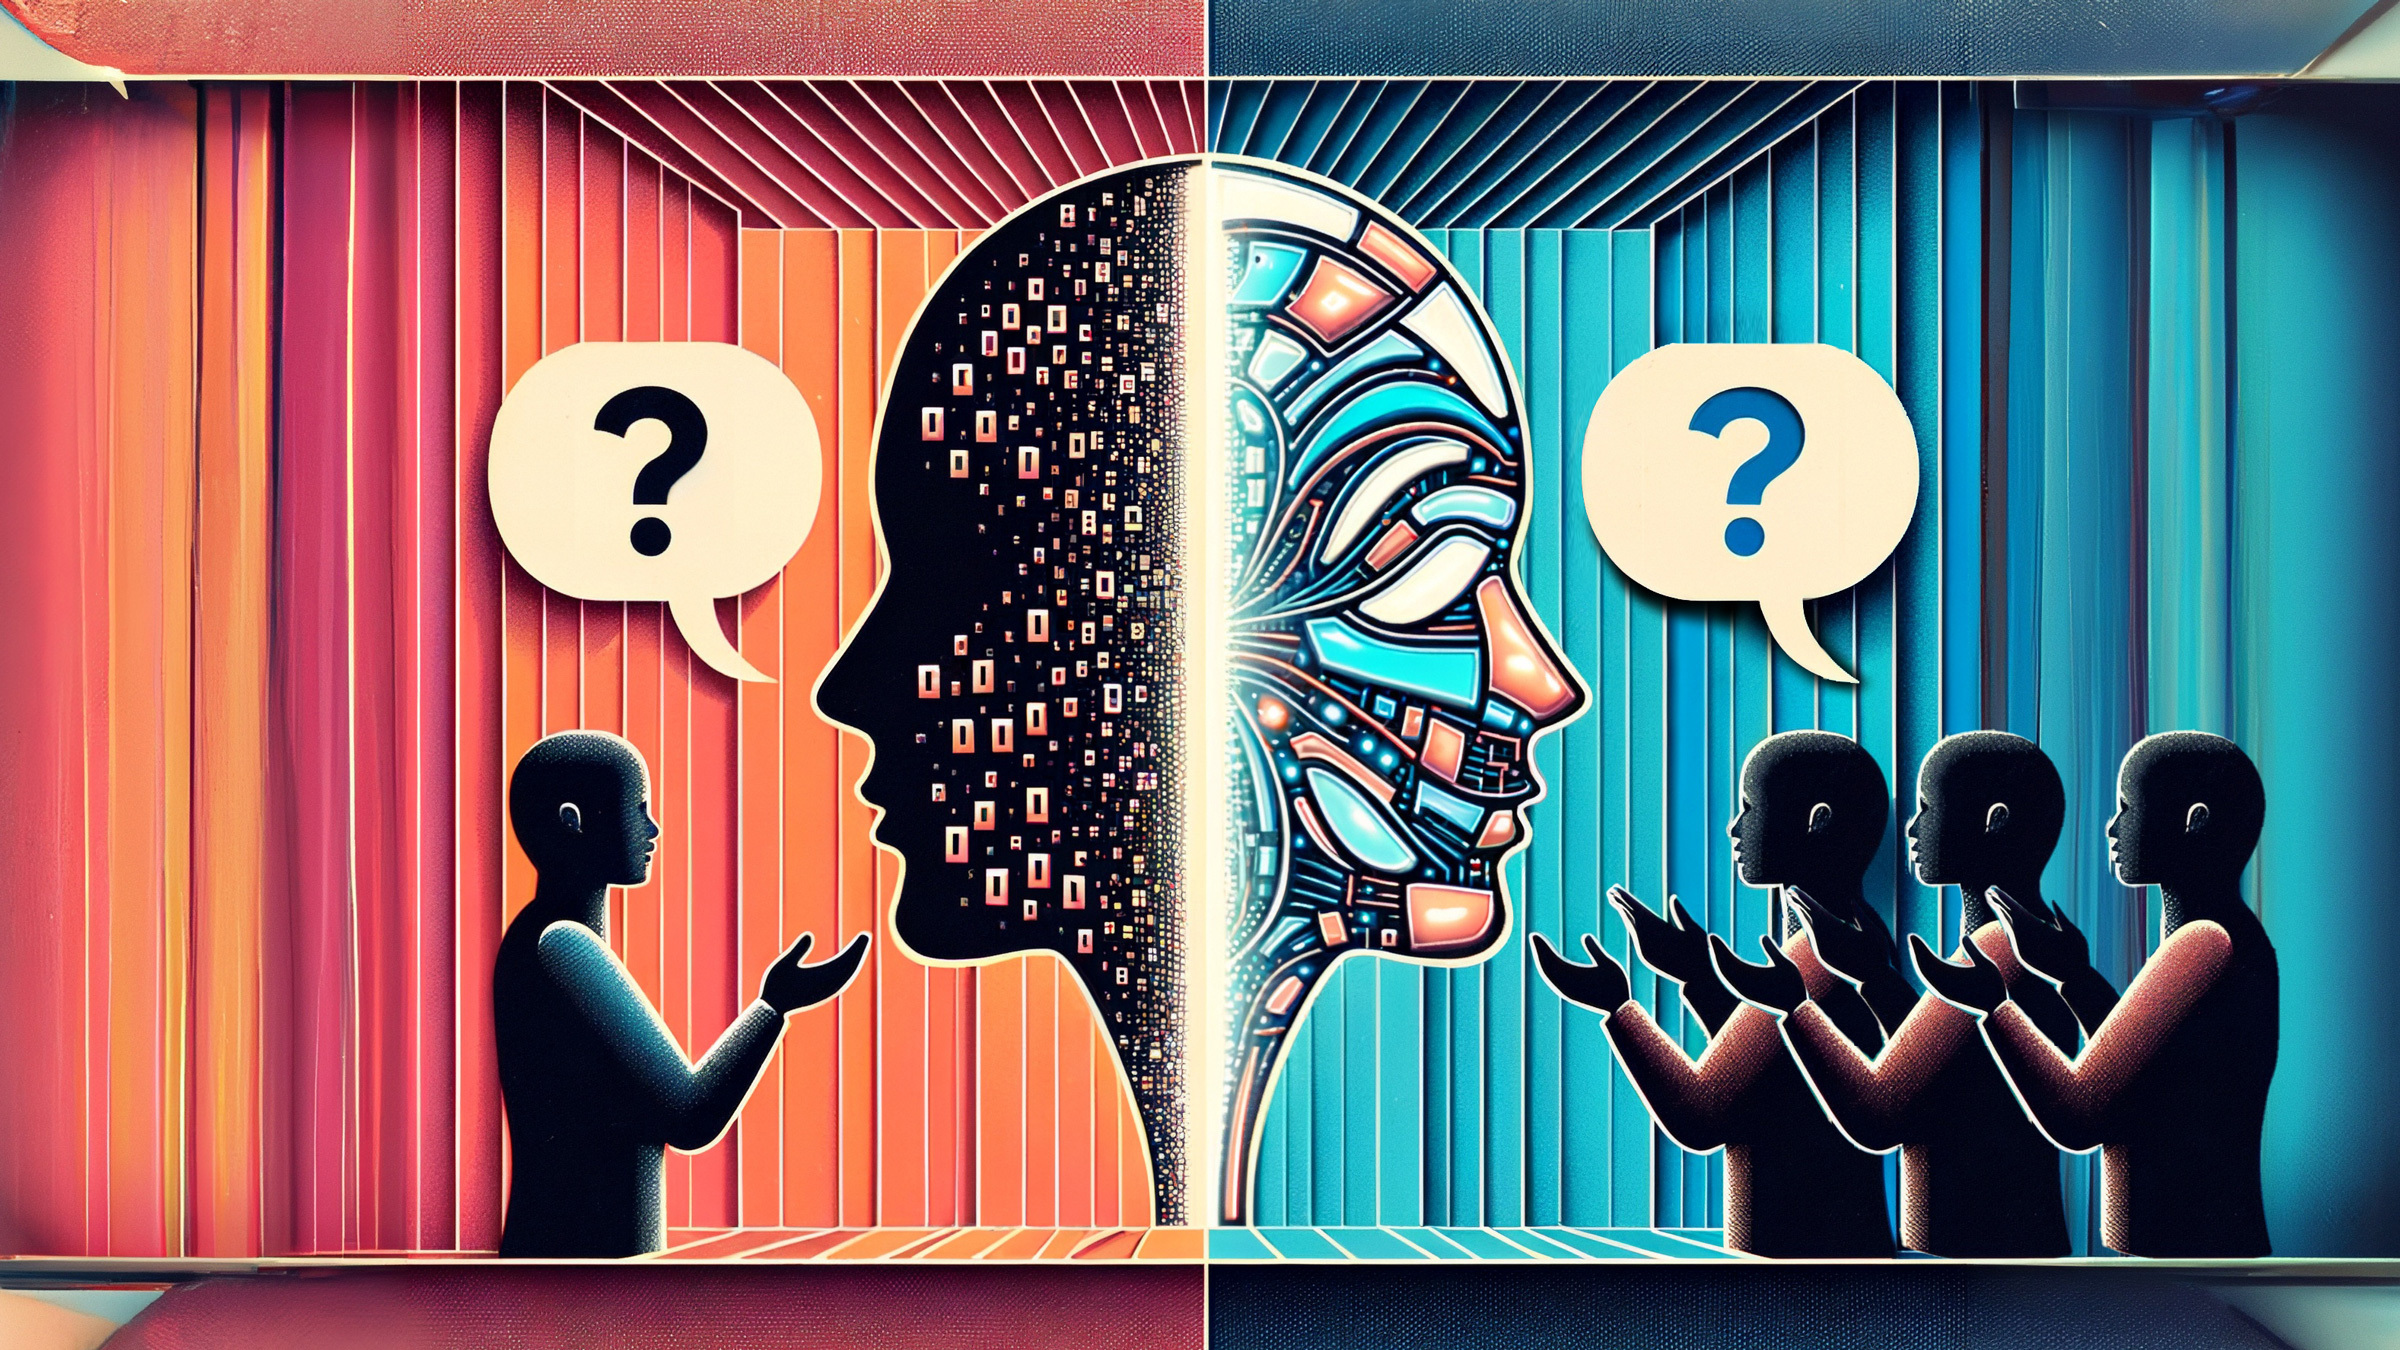 automated face asks a question; individuals query a different automated face, illustration